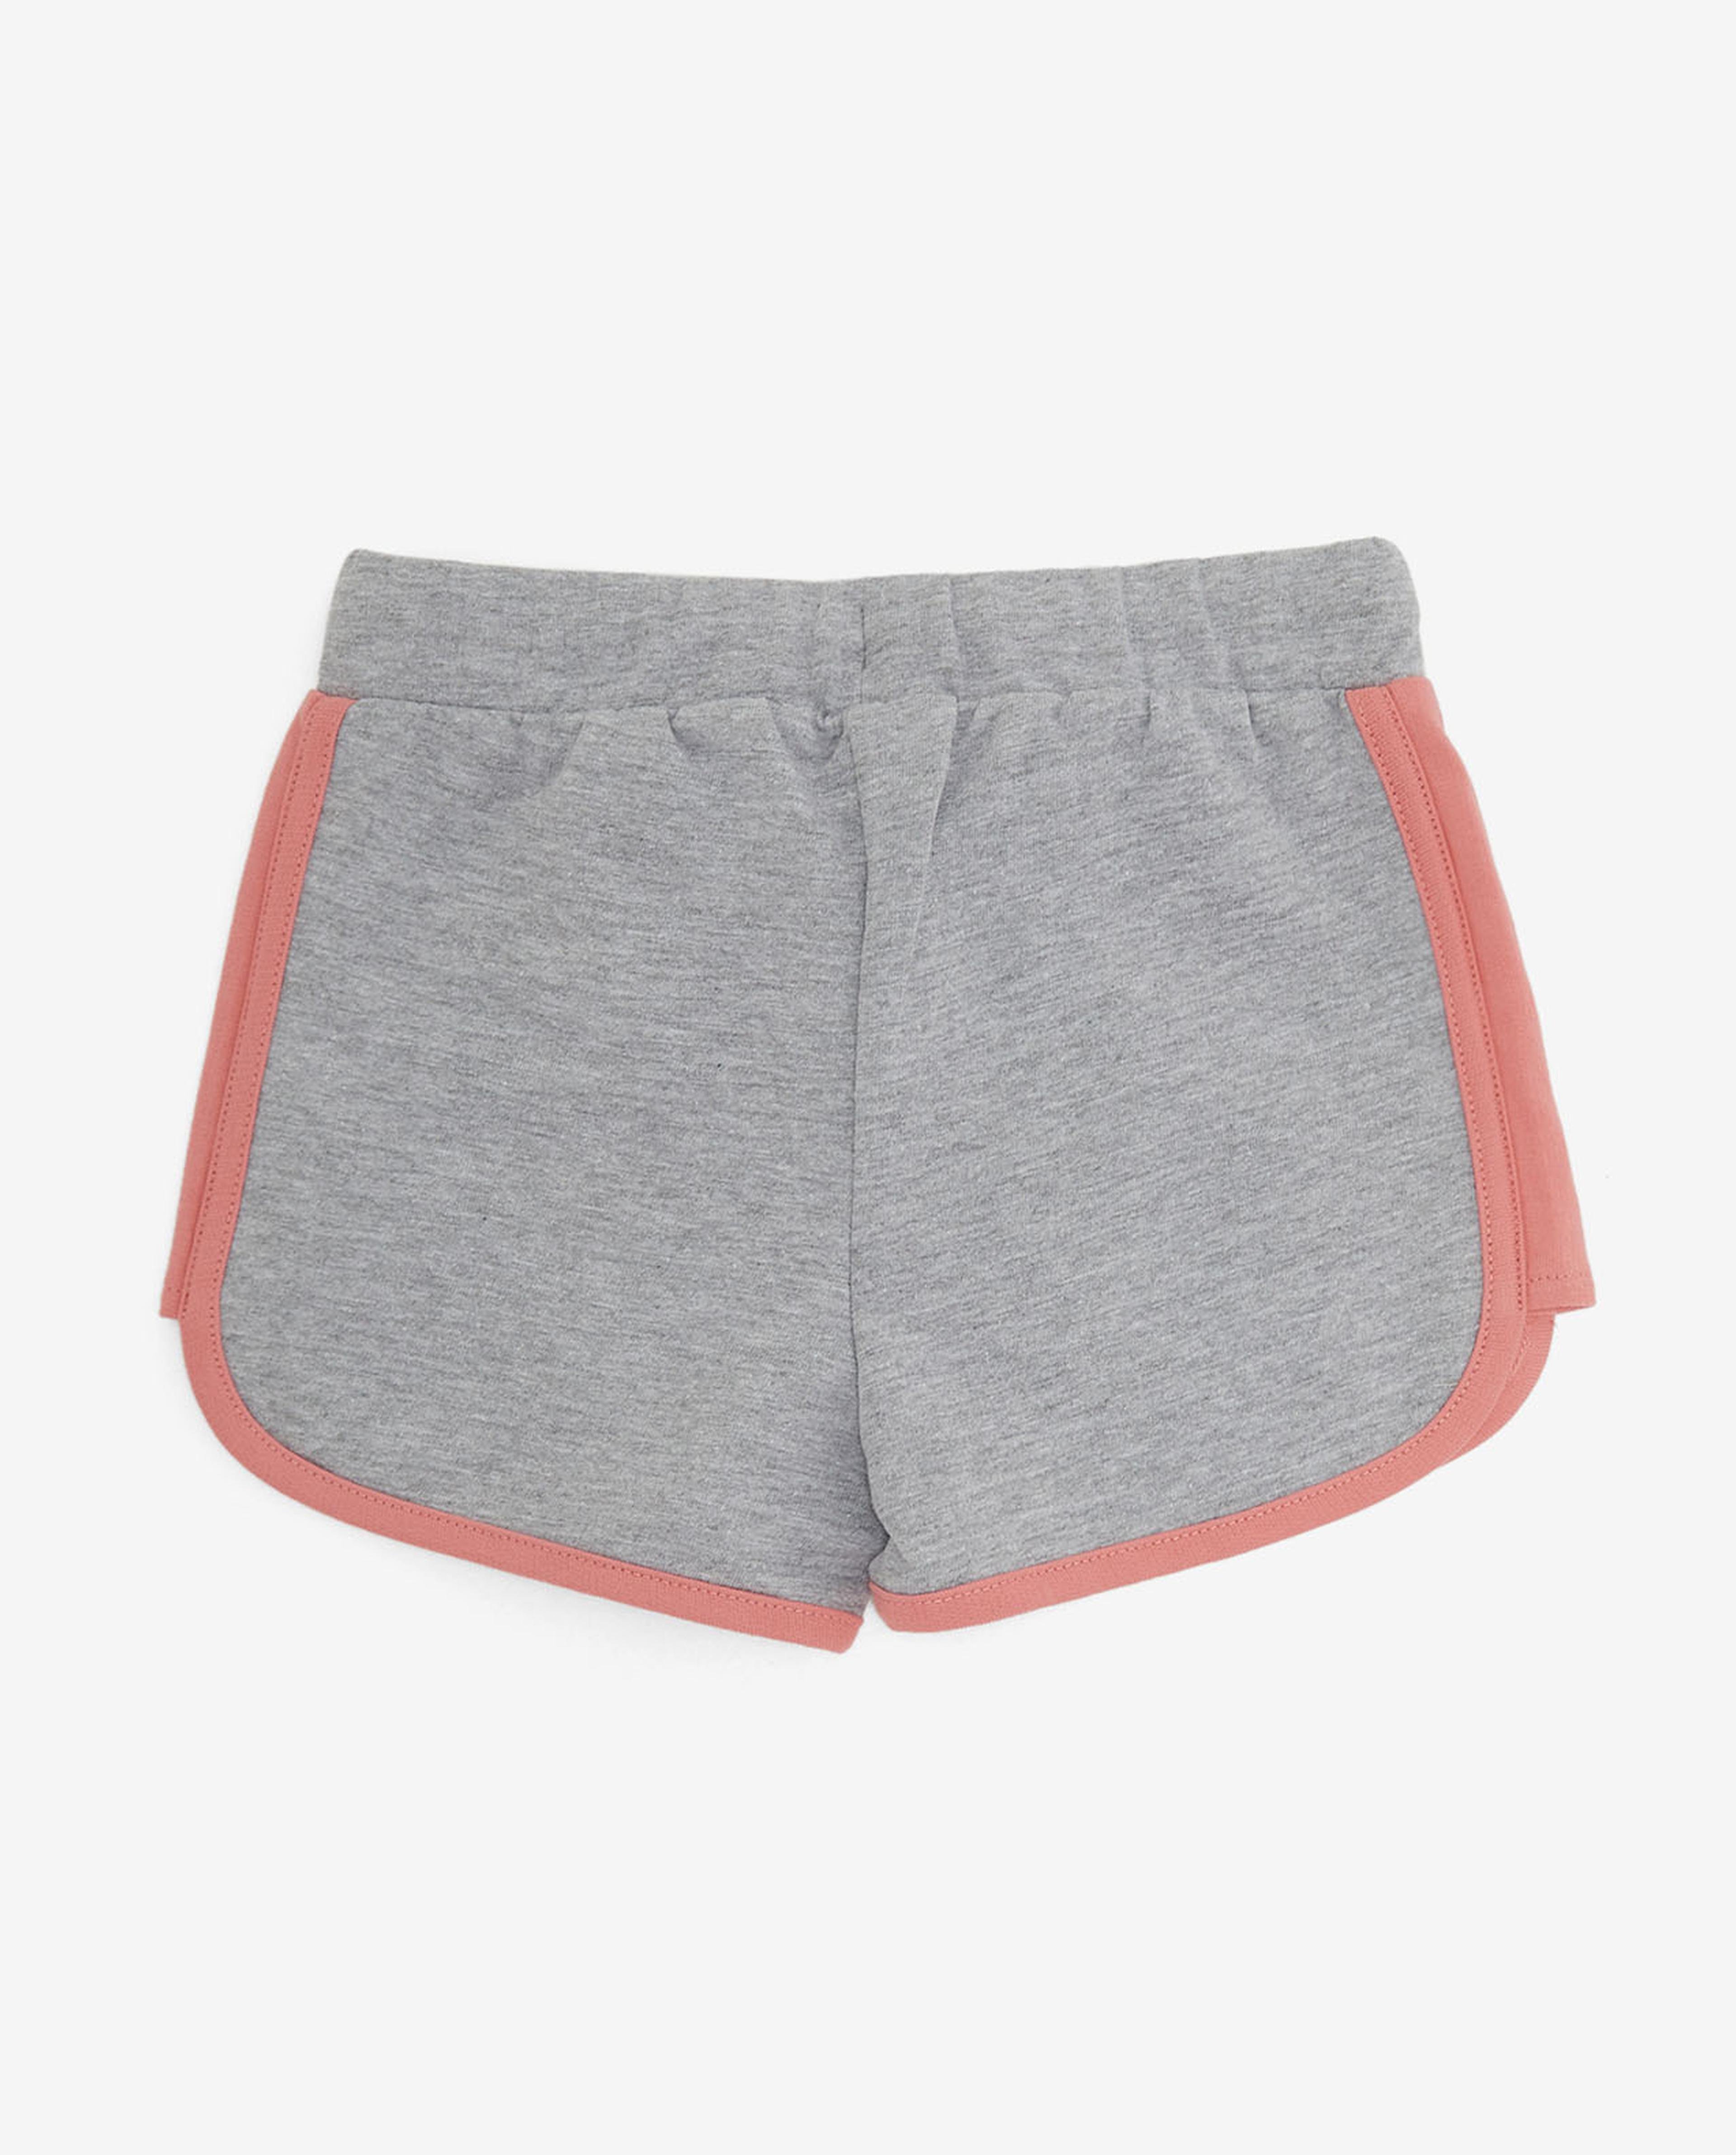 Grey Knit Shorts For Girls